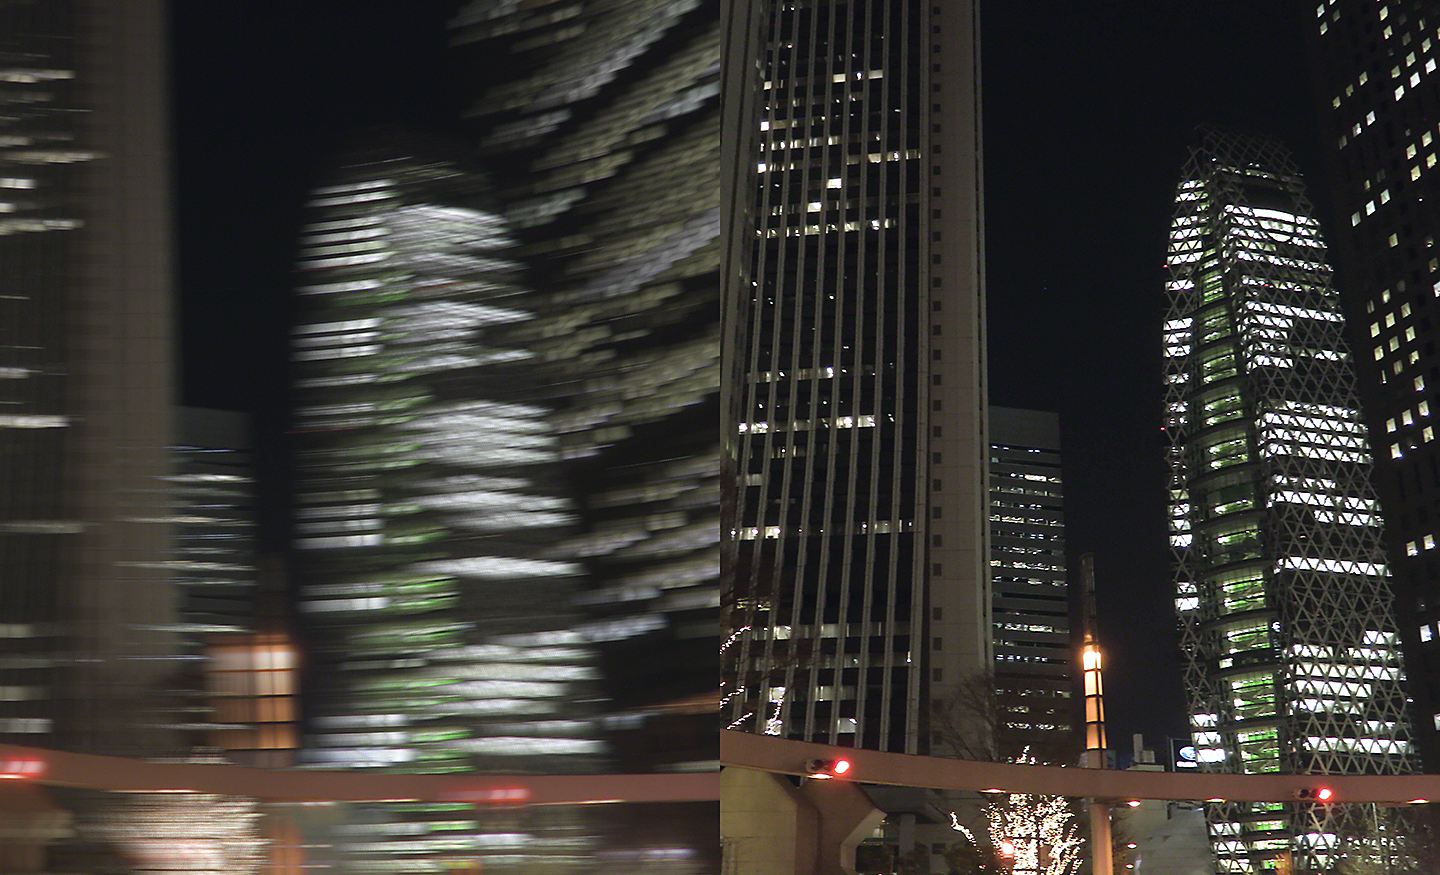 Two images of cityscape at night, one blurred, the other in sharp focus.